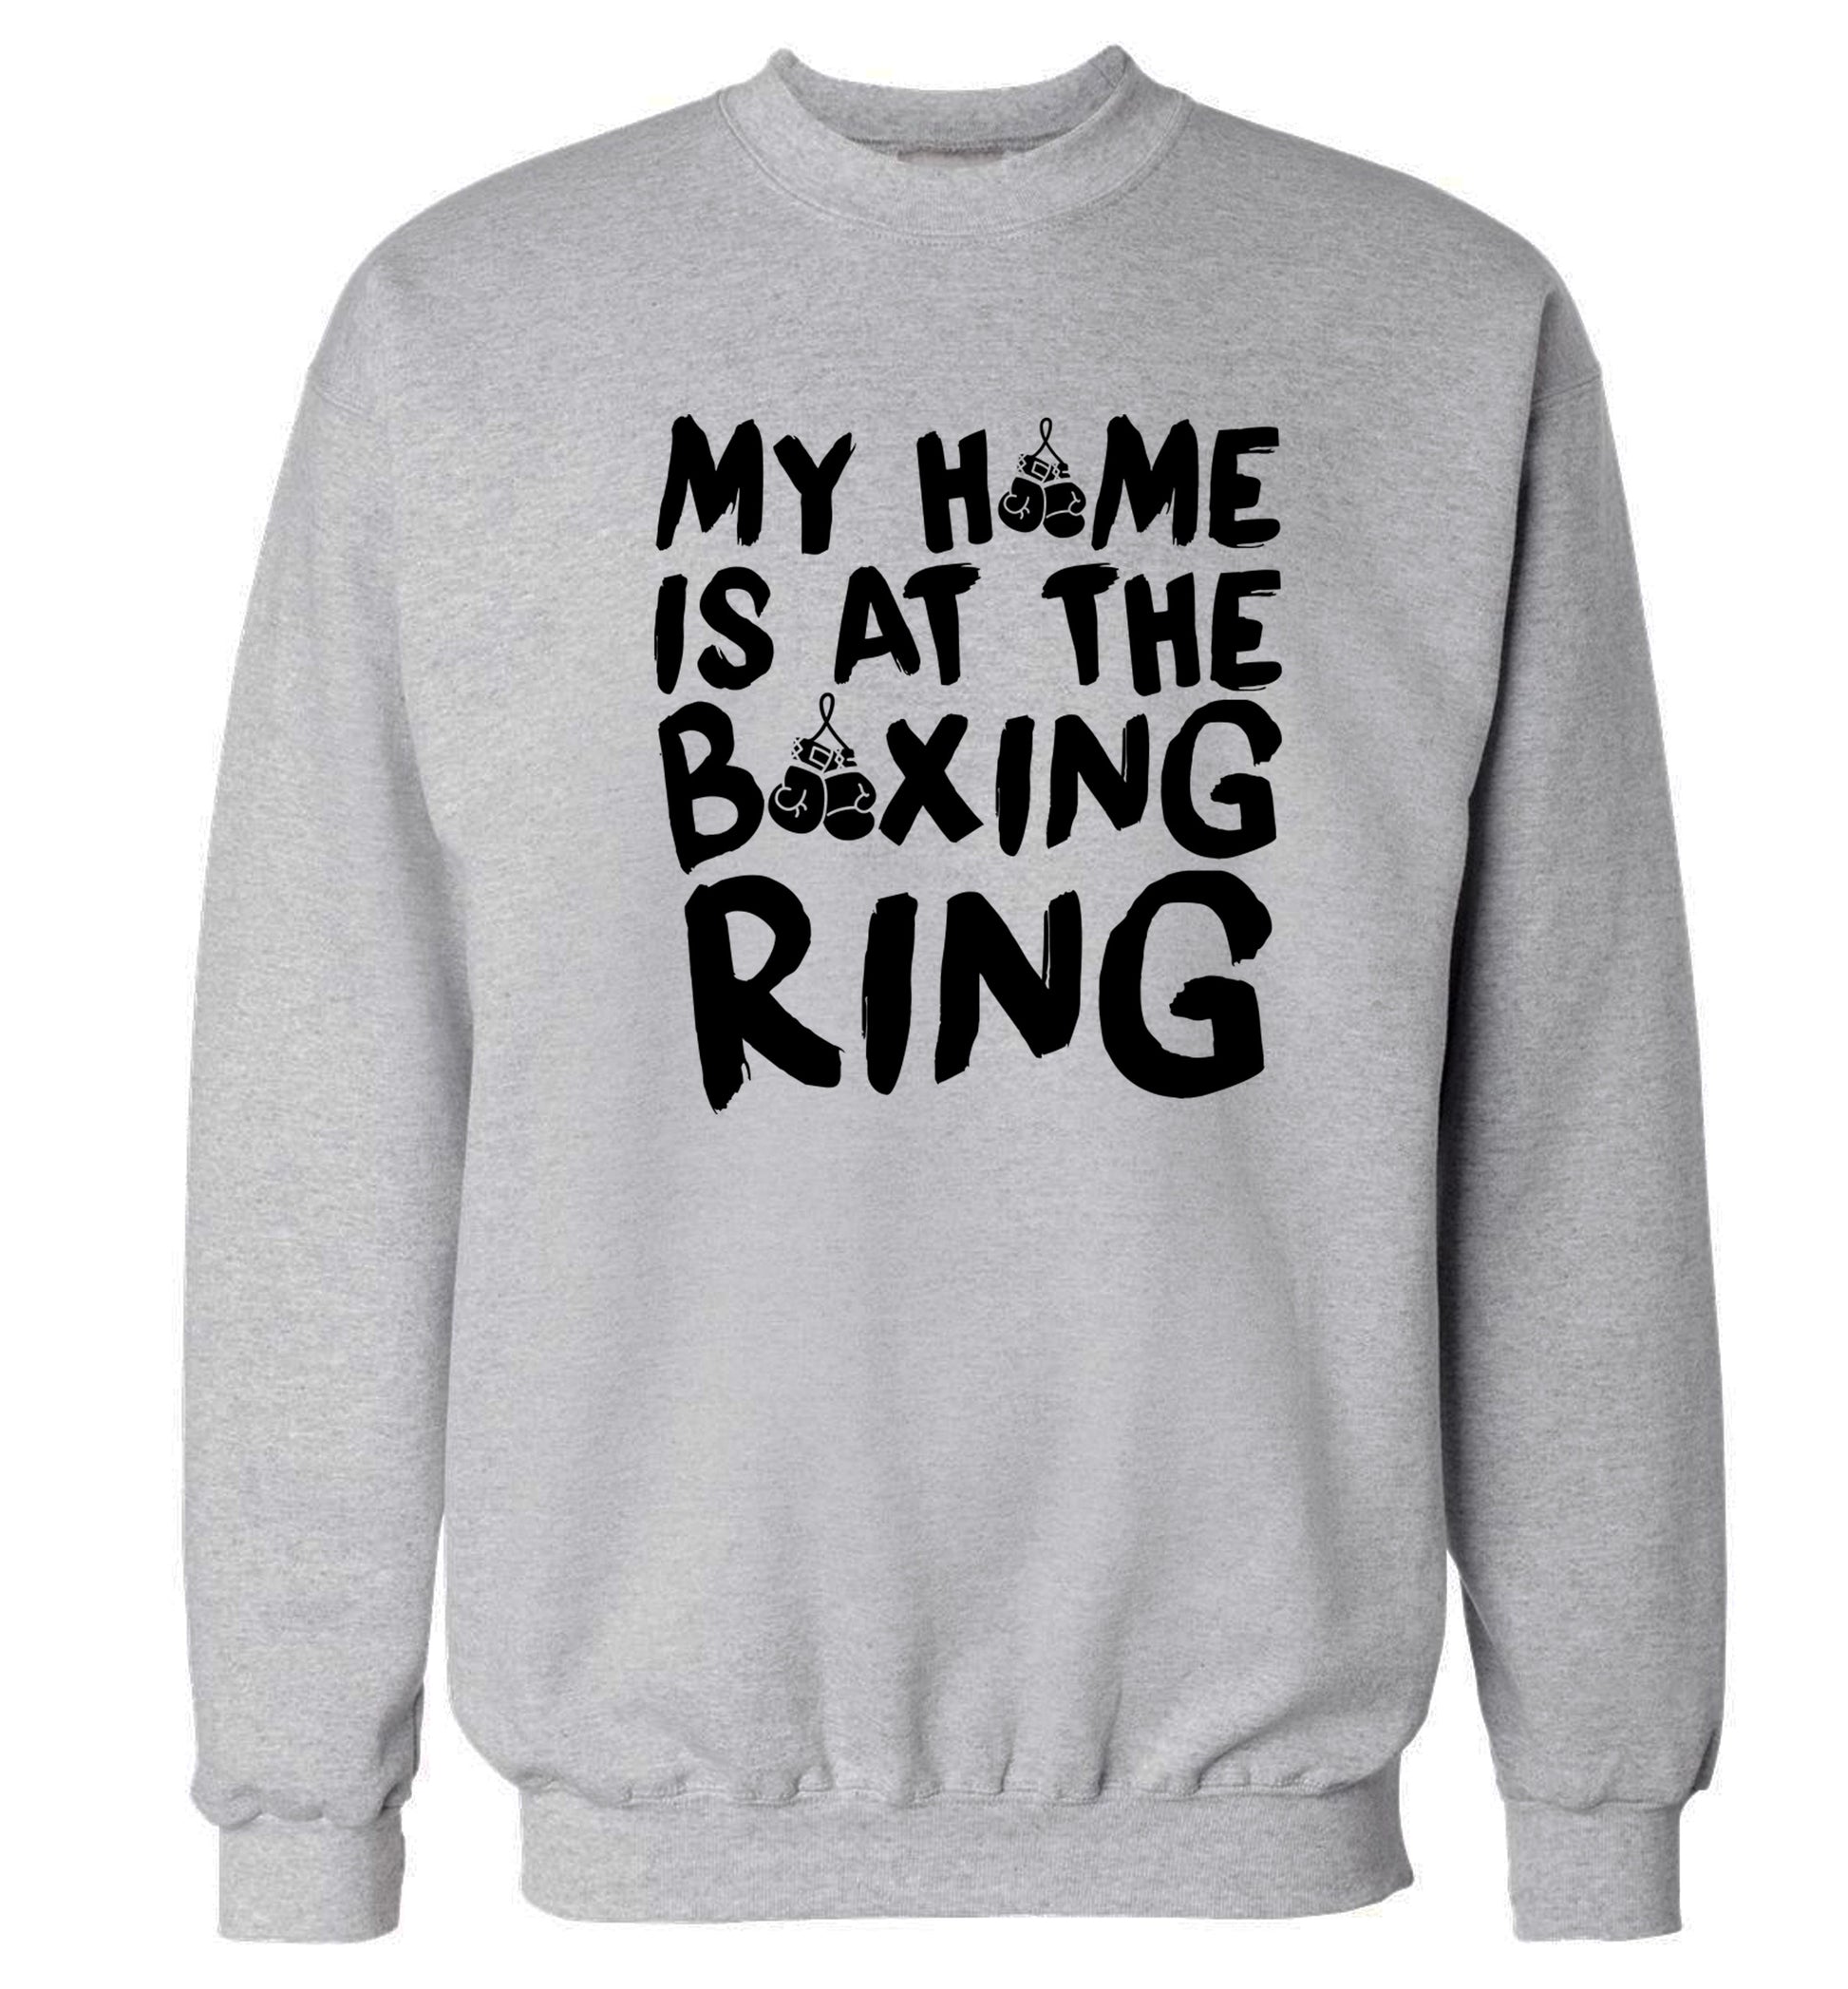 My home is at the boxing ring Adult's unisex grey Sweater 2XL